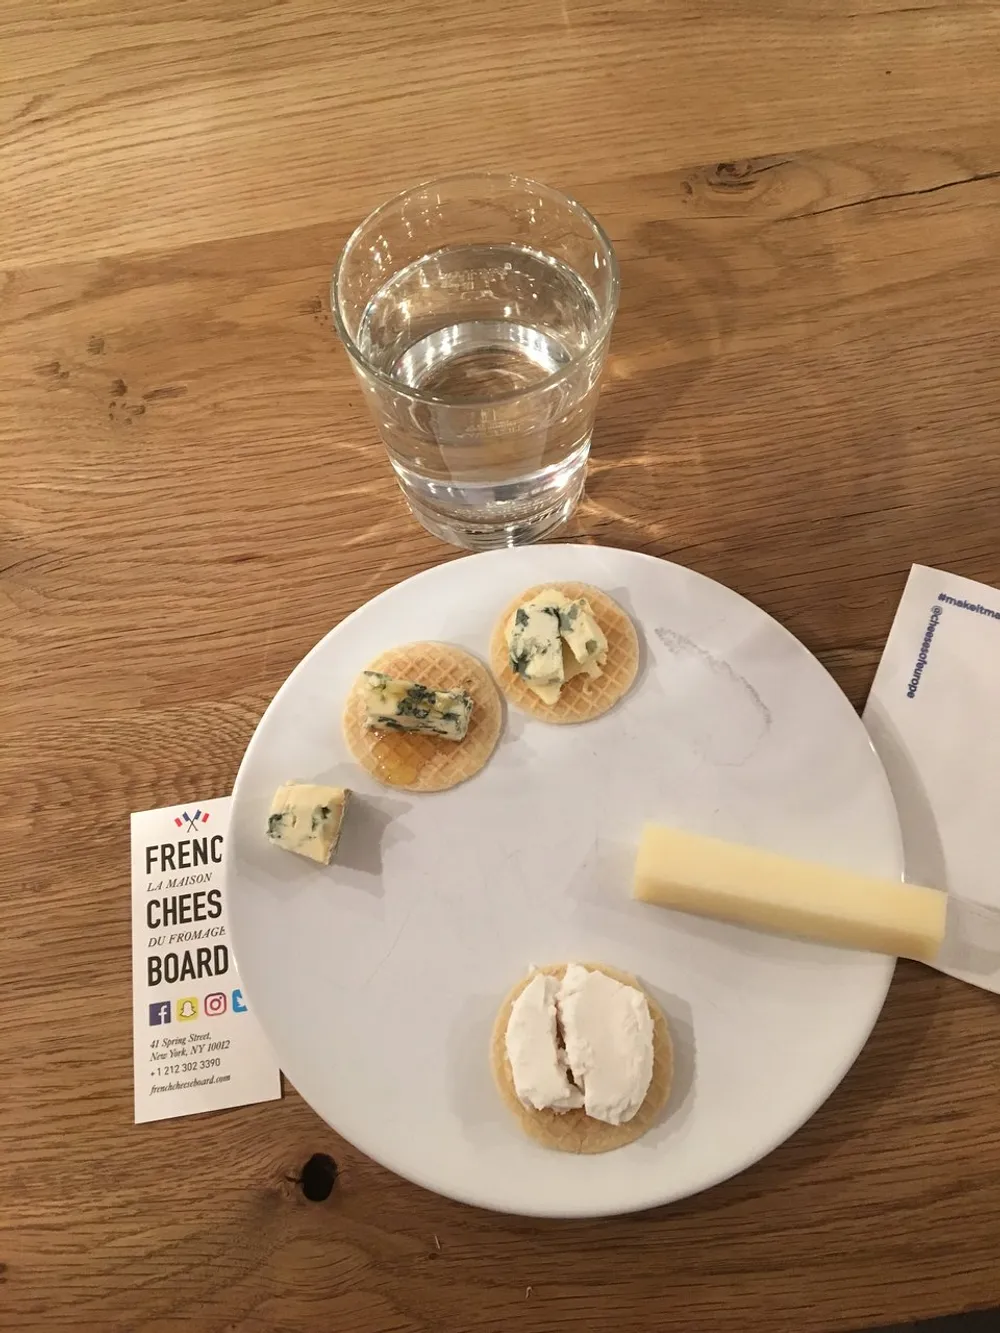 The image shows a water glass and a plate with different types of cheese on crackers alongside a cheese knife and a card from the French Cheese Board